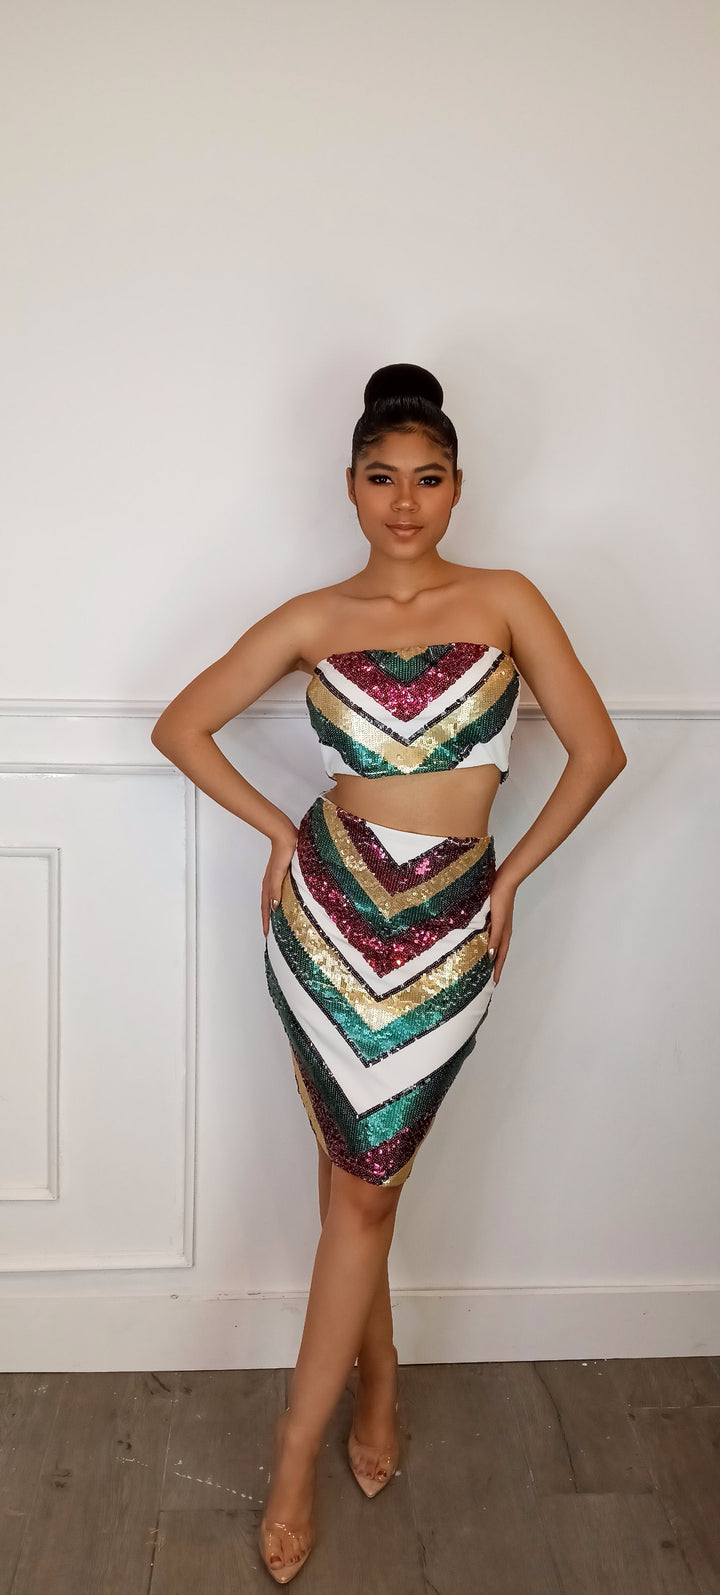 BOOGIE Sequin two-piece shimmer skirt and top-Outfit Sets-The Sang-Malandra Boutique, Women's Fashion Boutique Located in Las Vegas, NV